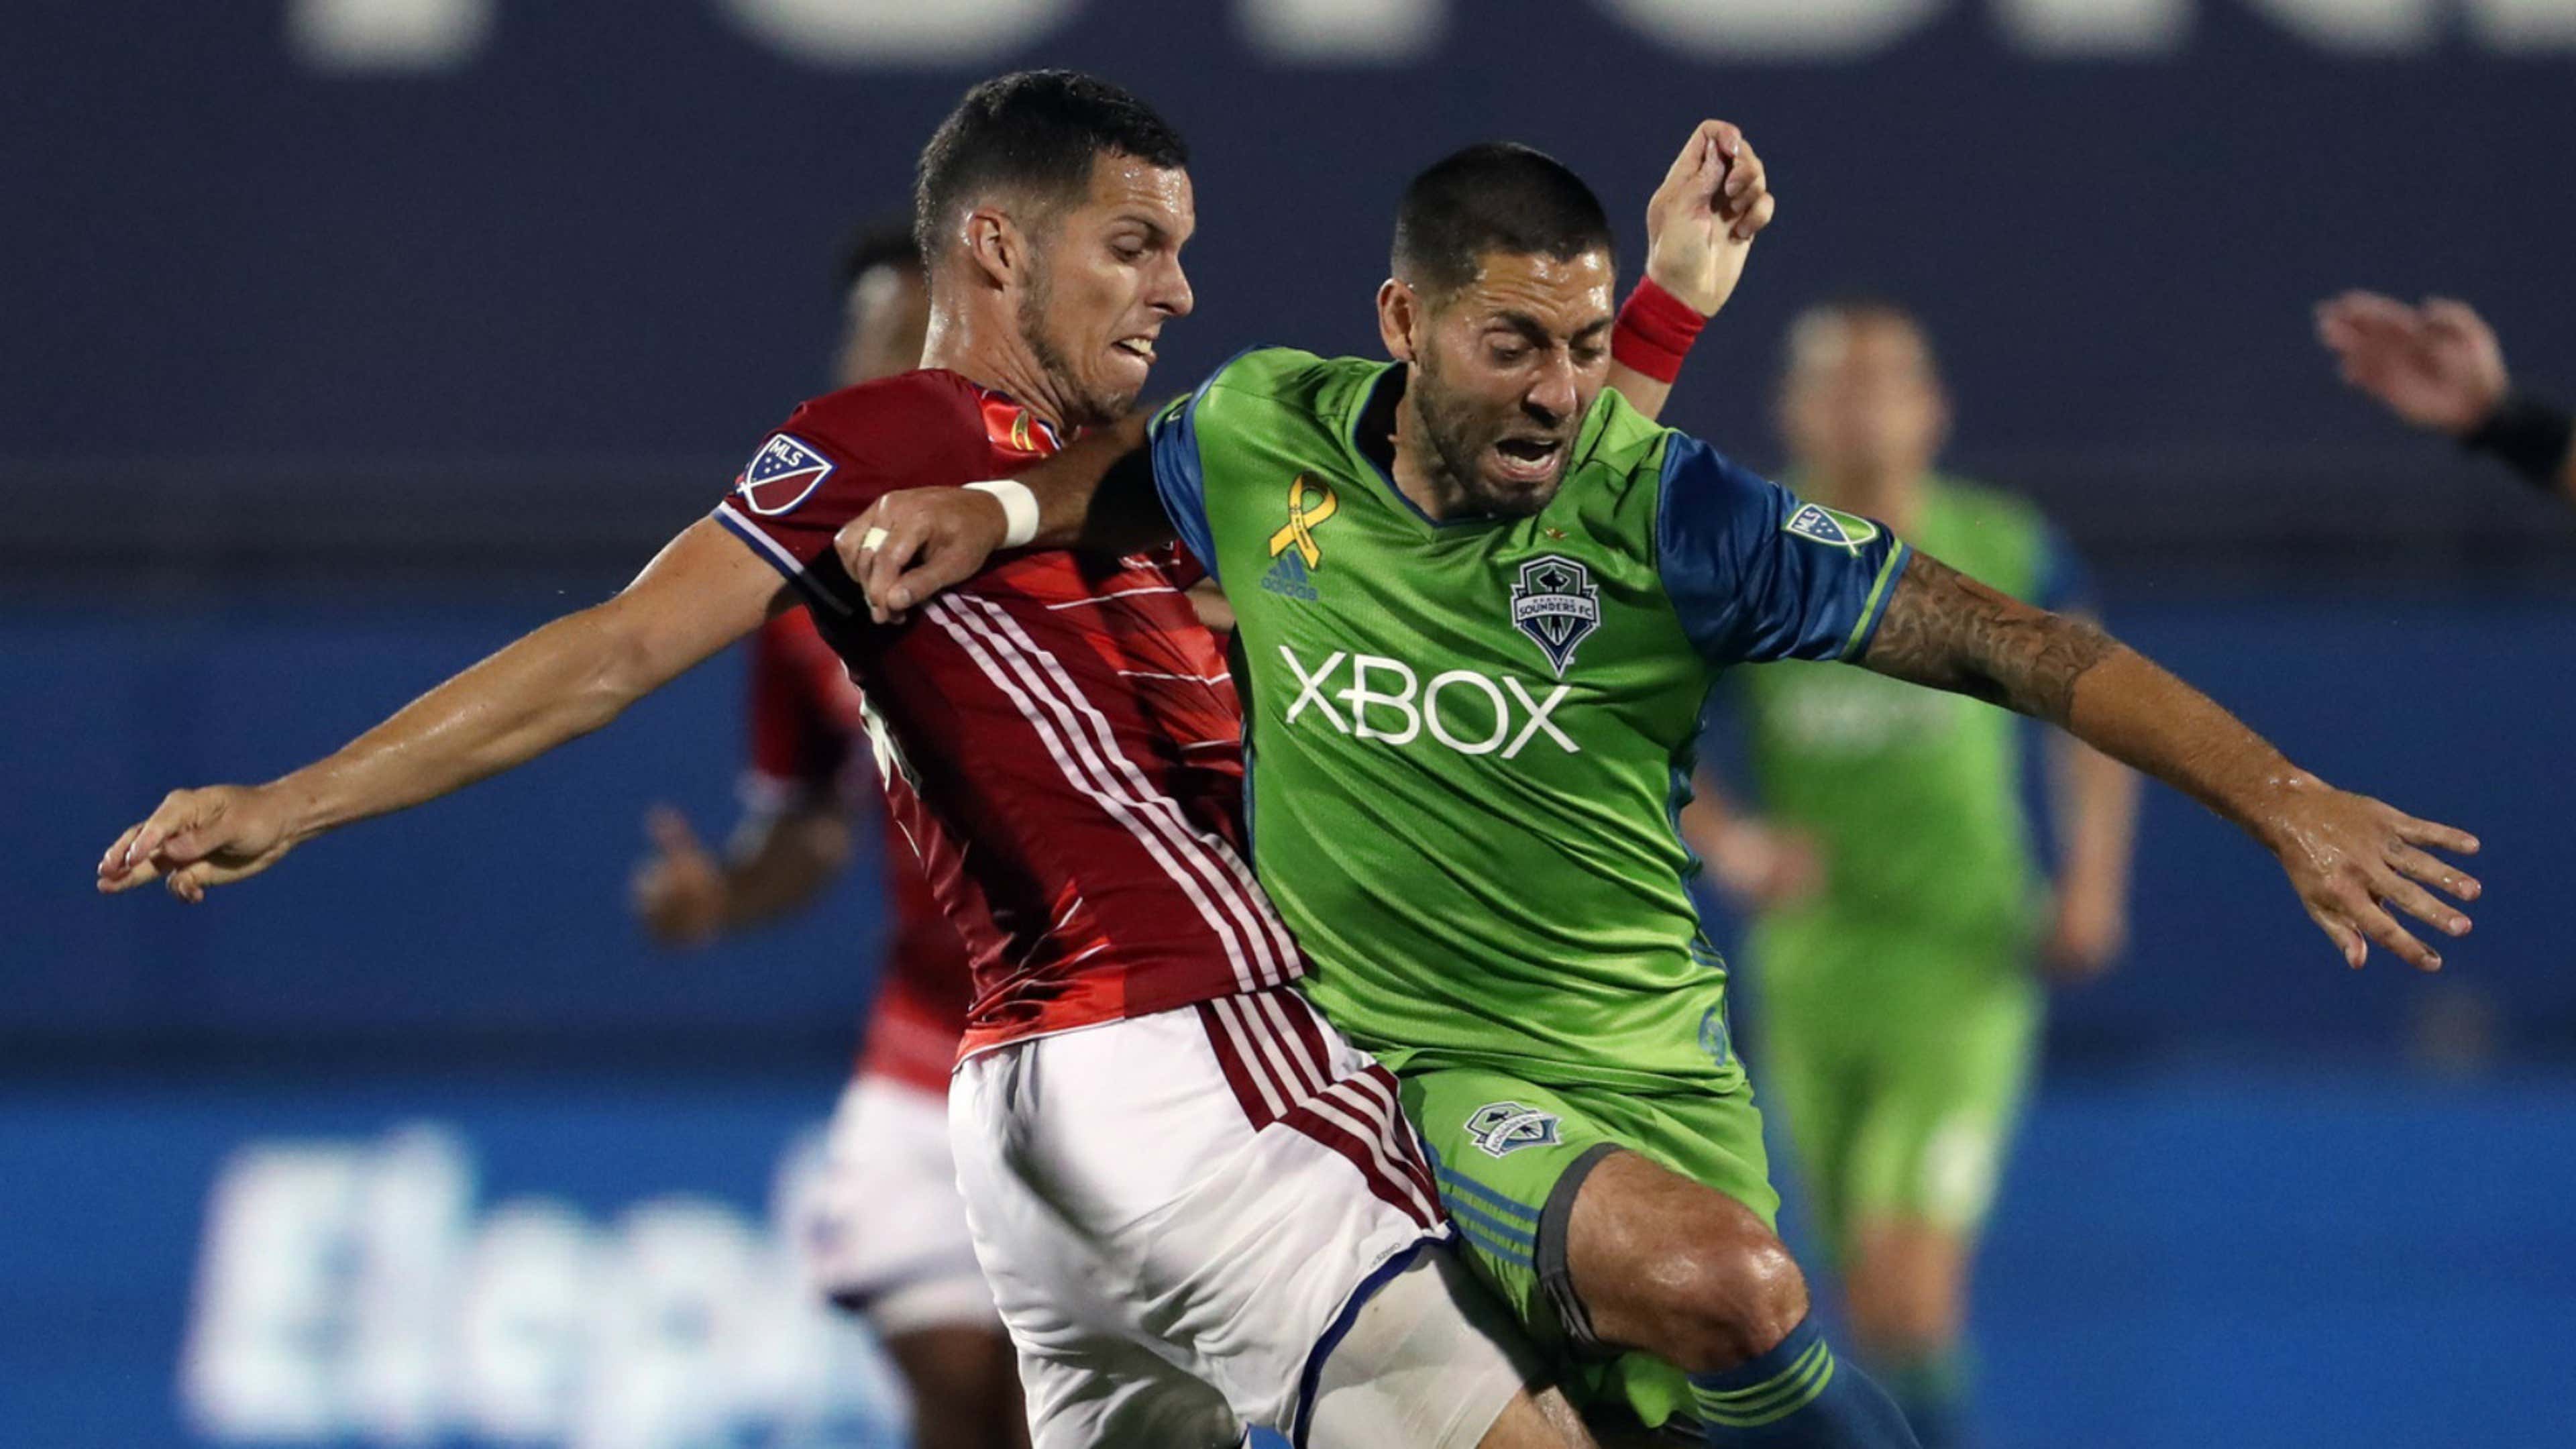 Clint Dempsey to national team, Cristian Roldan back to Sounders